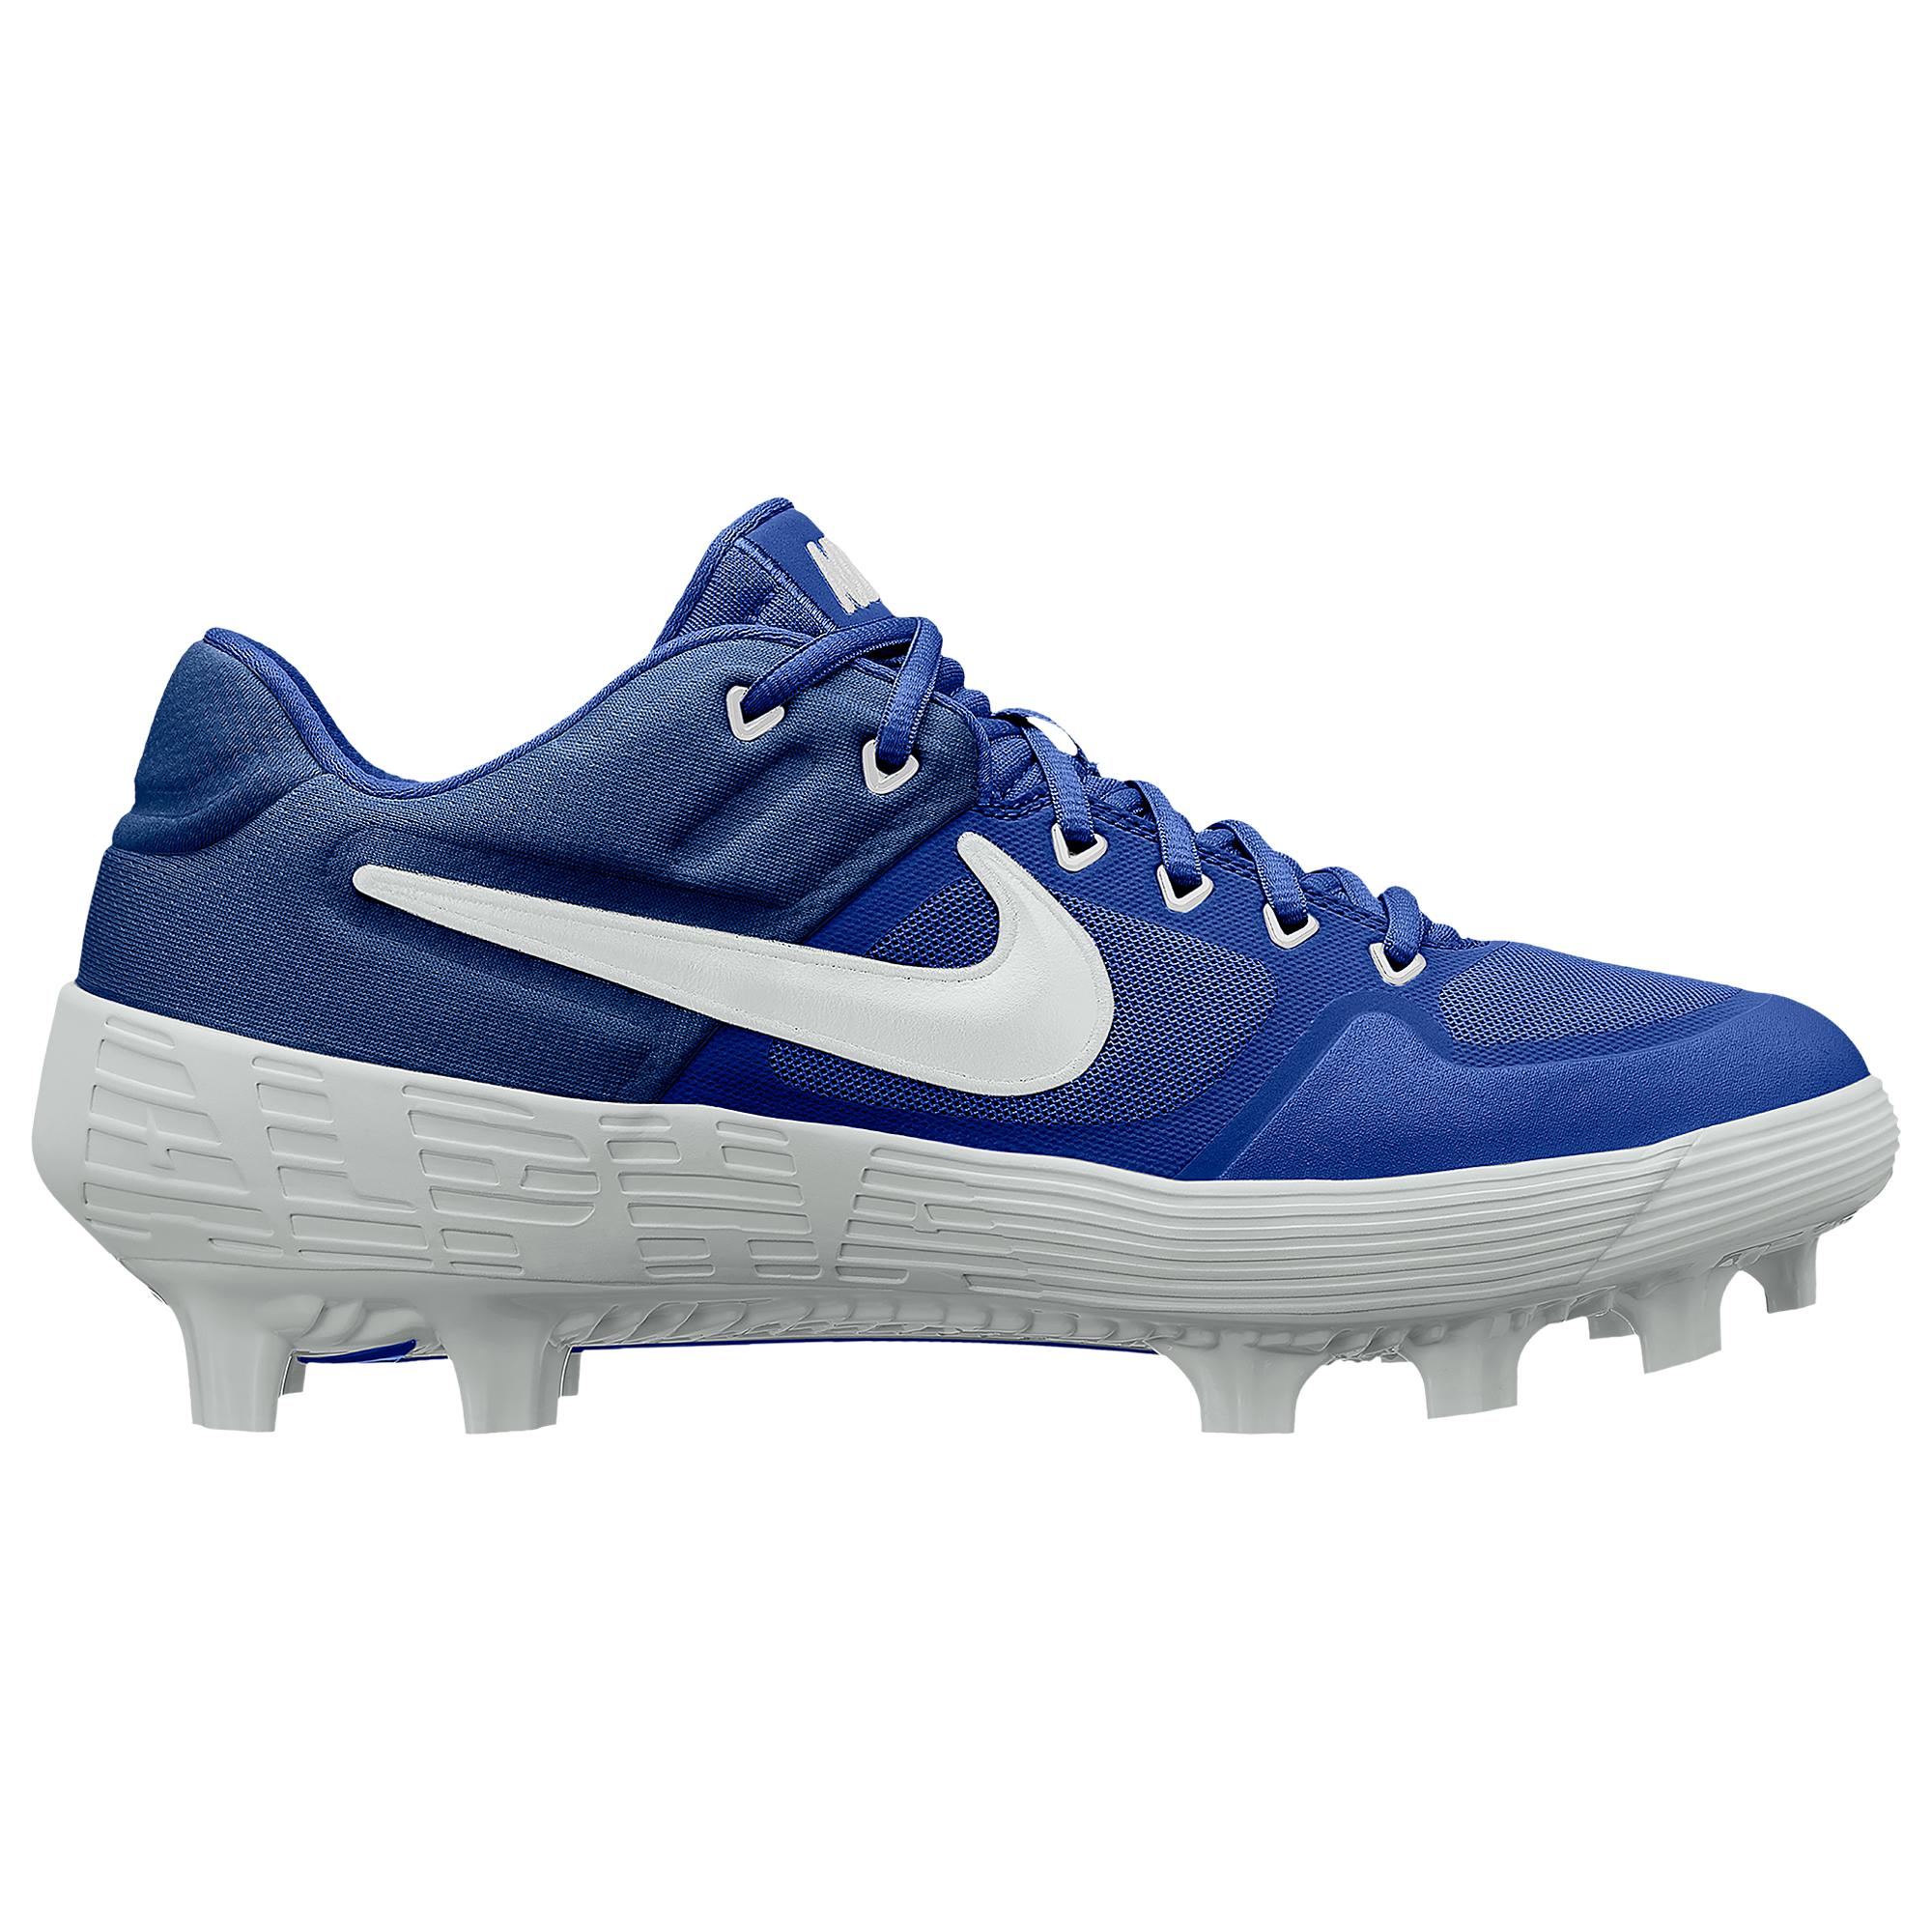 Nike Alpha Huarache Elite 2 Low Mcs Molded Cleats Shoes in Blue for Men